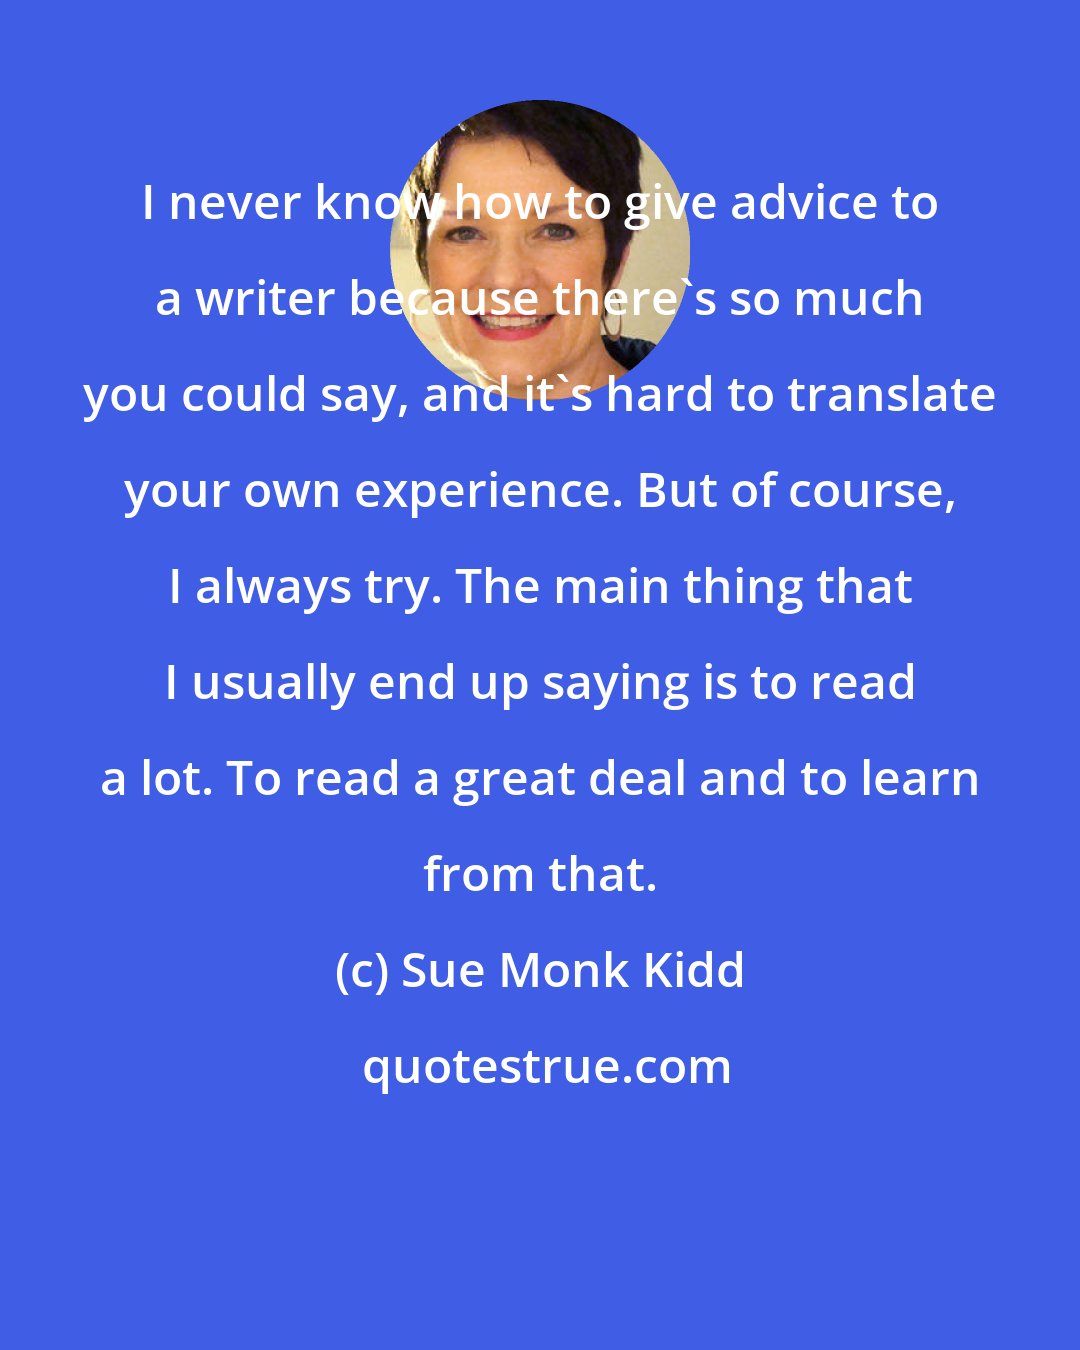 Sue Monk Kidd: I never know how to give advice to a writer because there's so much you could say, and it's hard to translate your own experience. But of course, I always try. The main thing that I usually end up saying is to read a lot. To read a great deal and to learn from that.